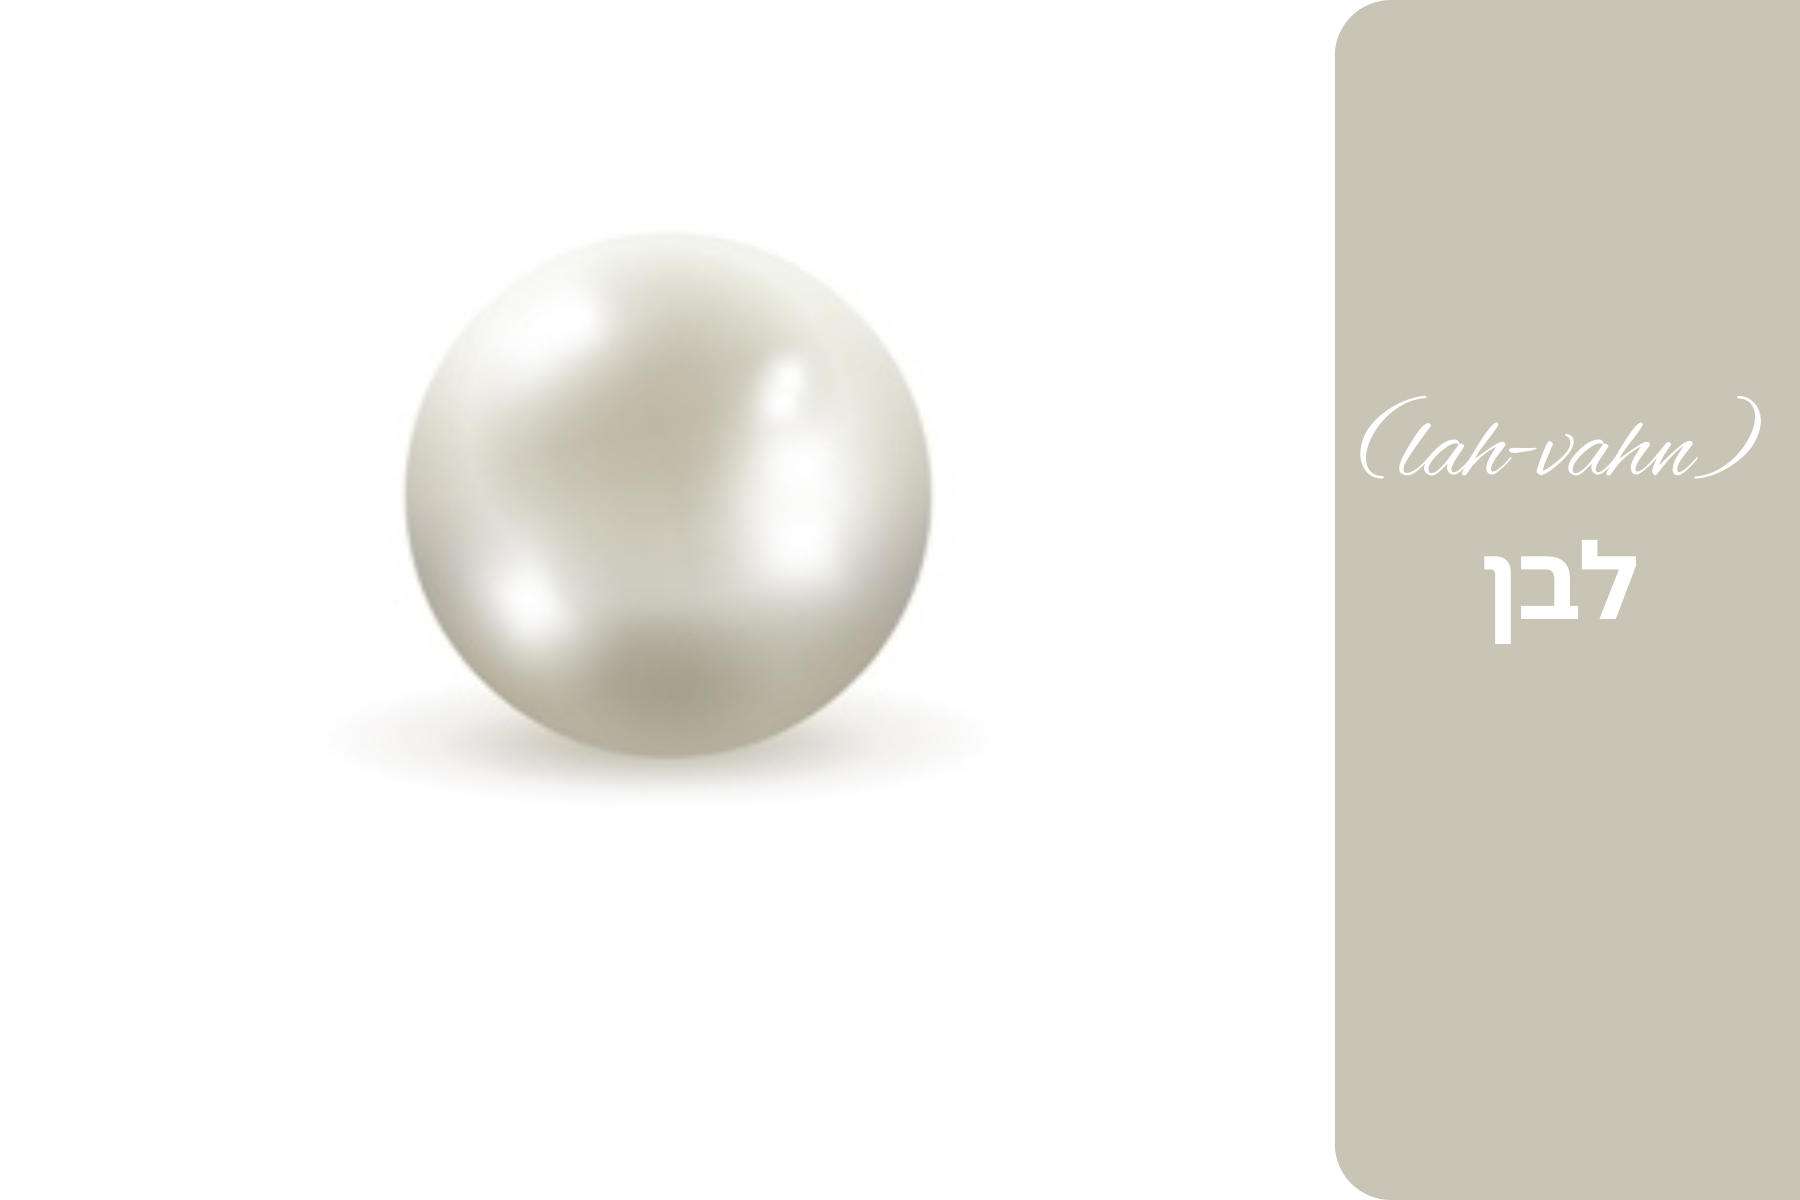 The gemstone known as a pearl with its Hebrew name